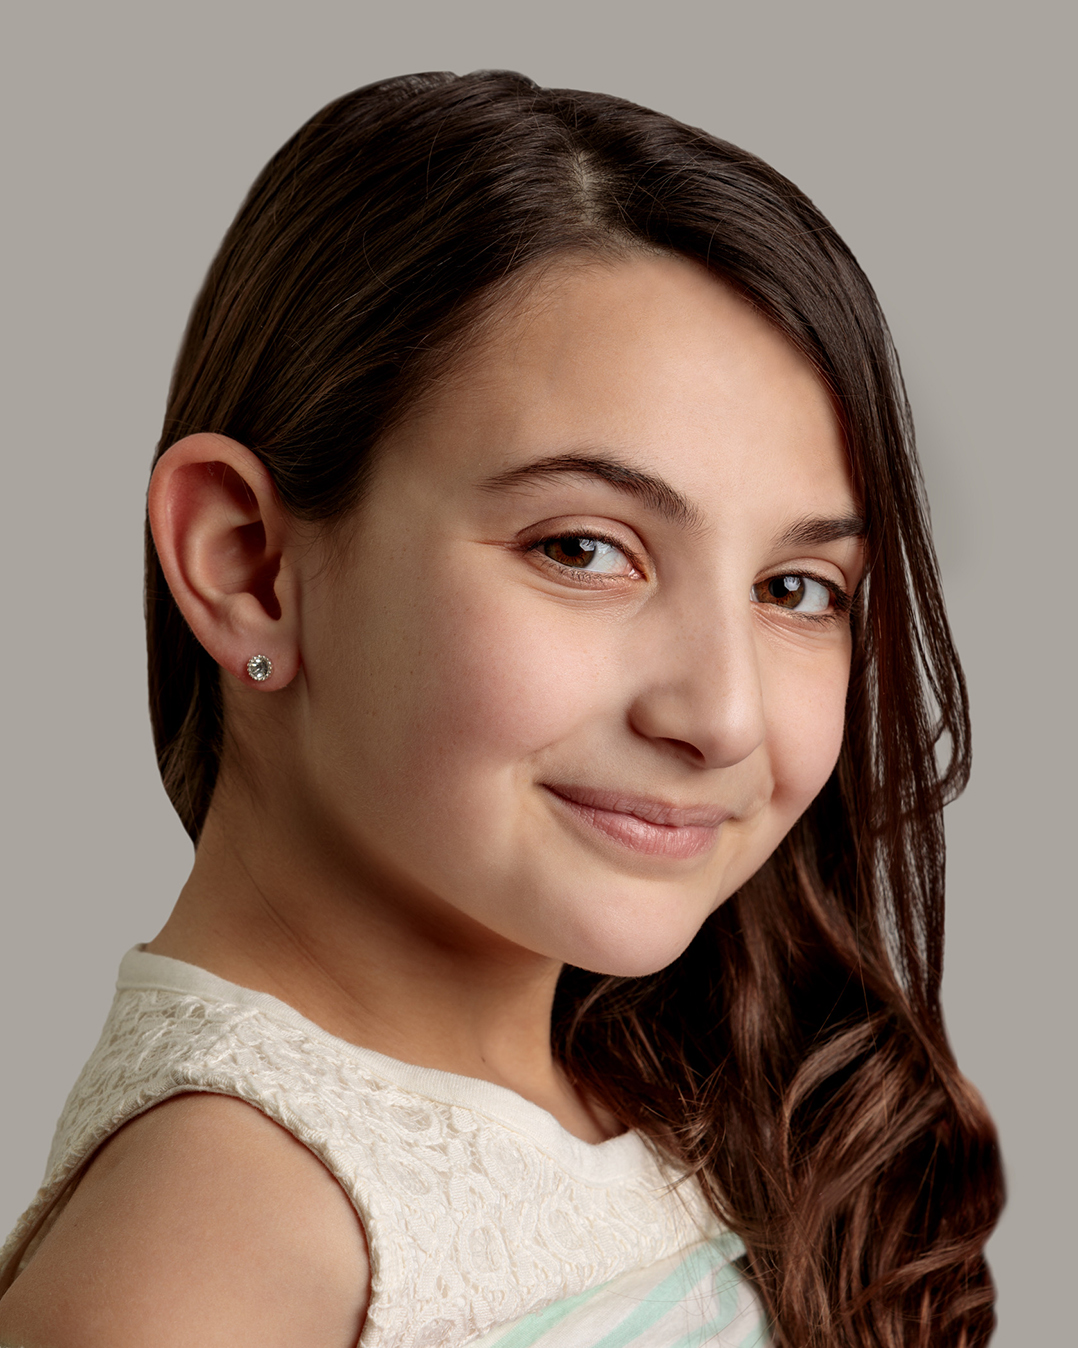 Sixth-grader performs in virtual streaming shows • Current Publishing